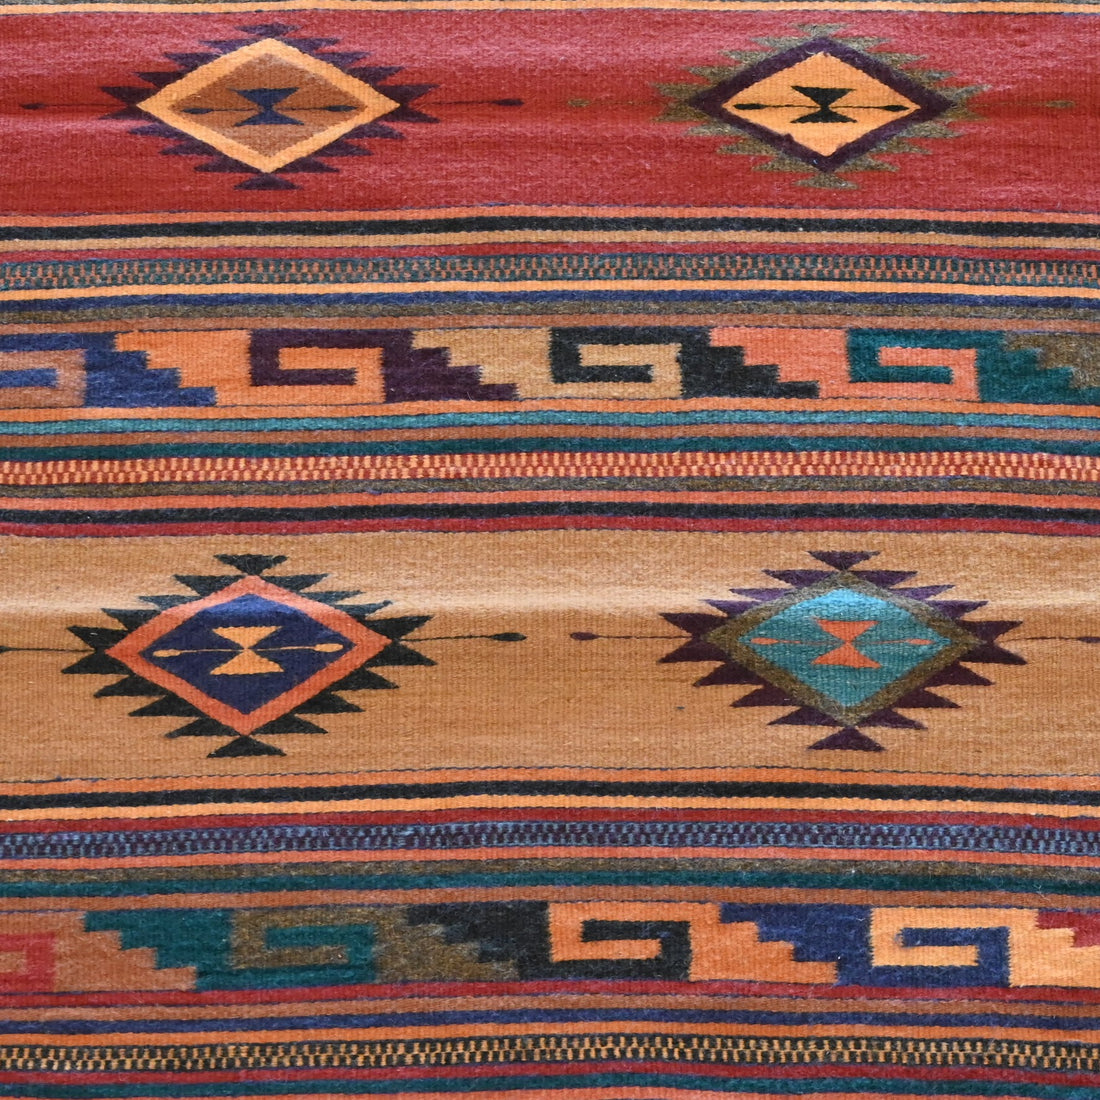 Escalante Rugs Hand Woven by Pedro Gutierrez view of pattern